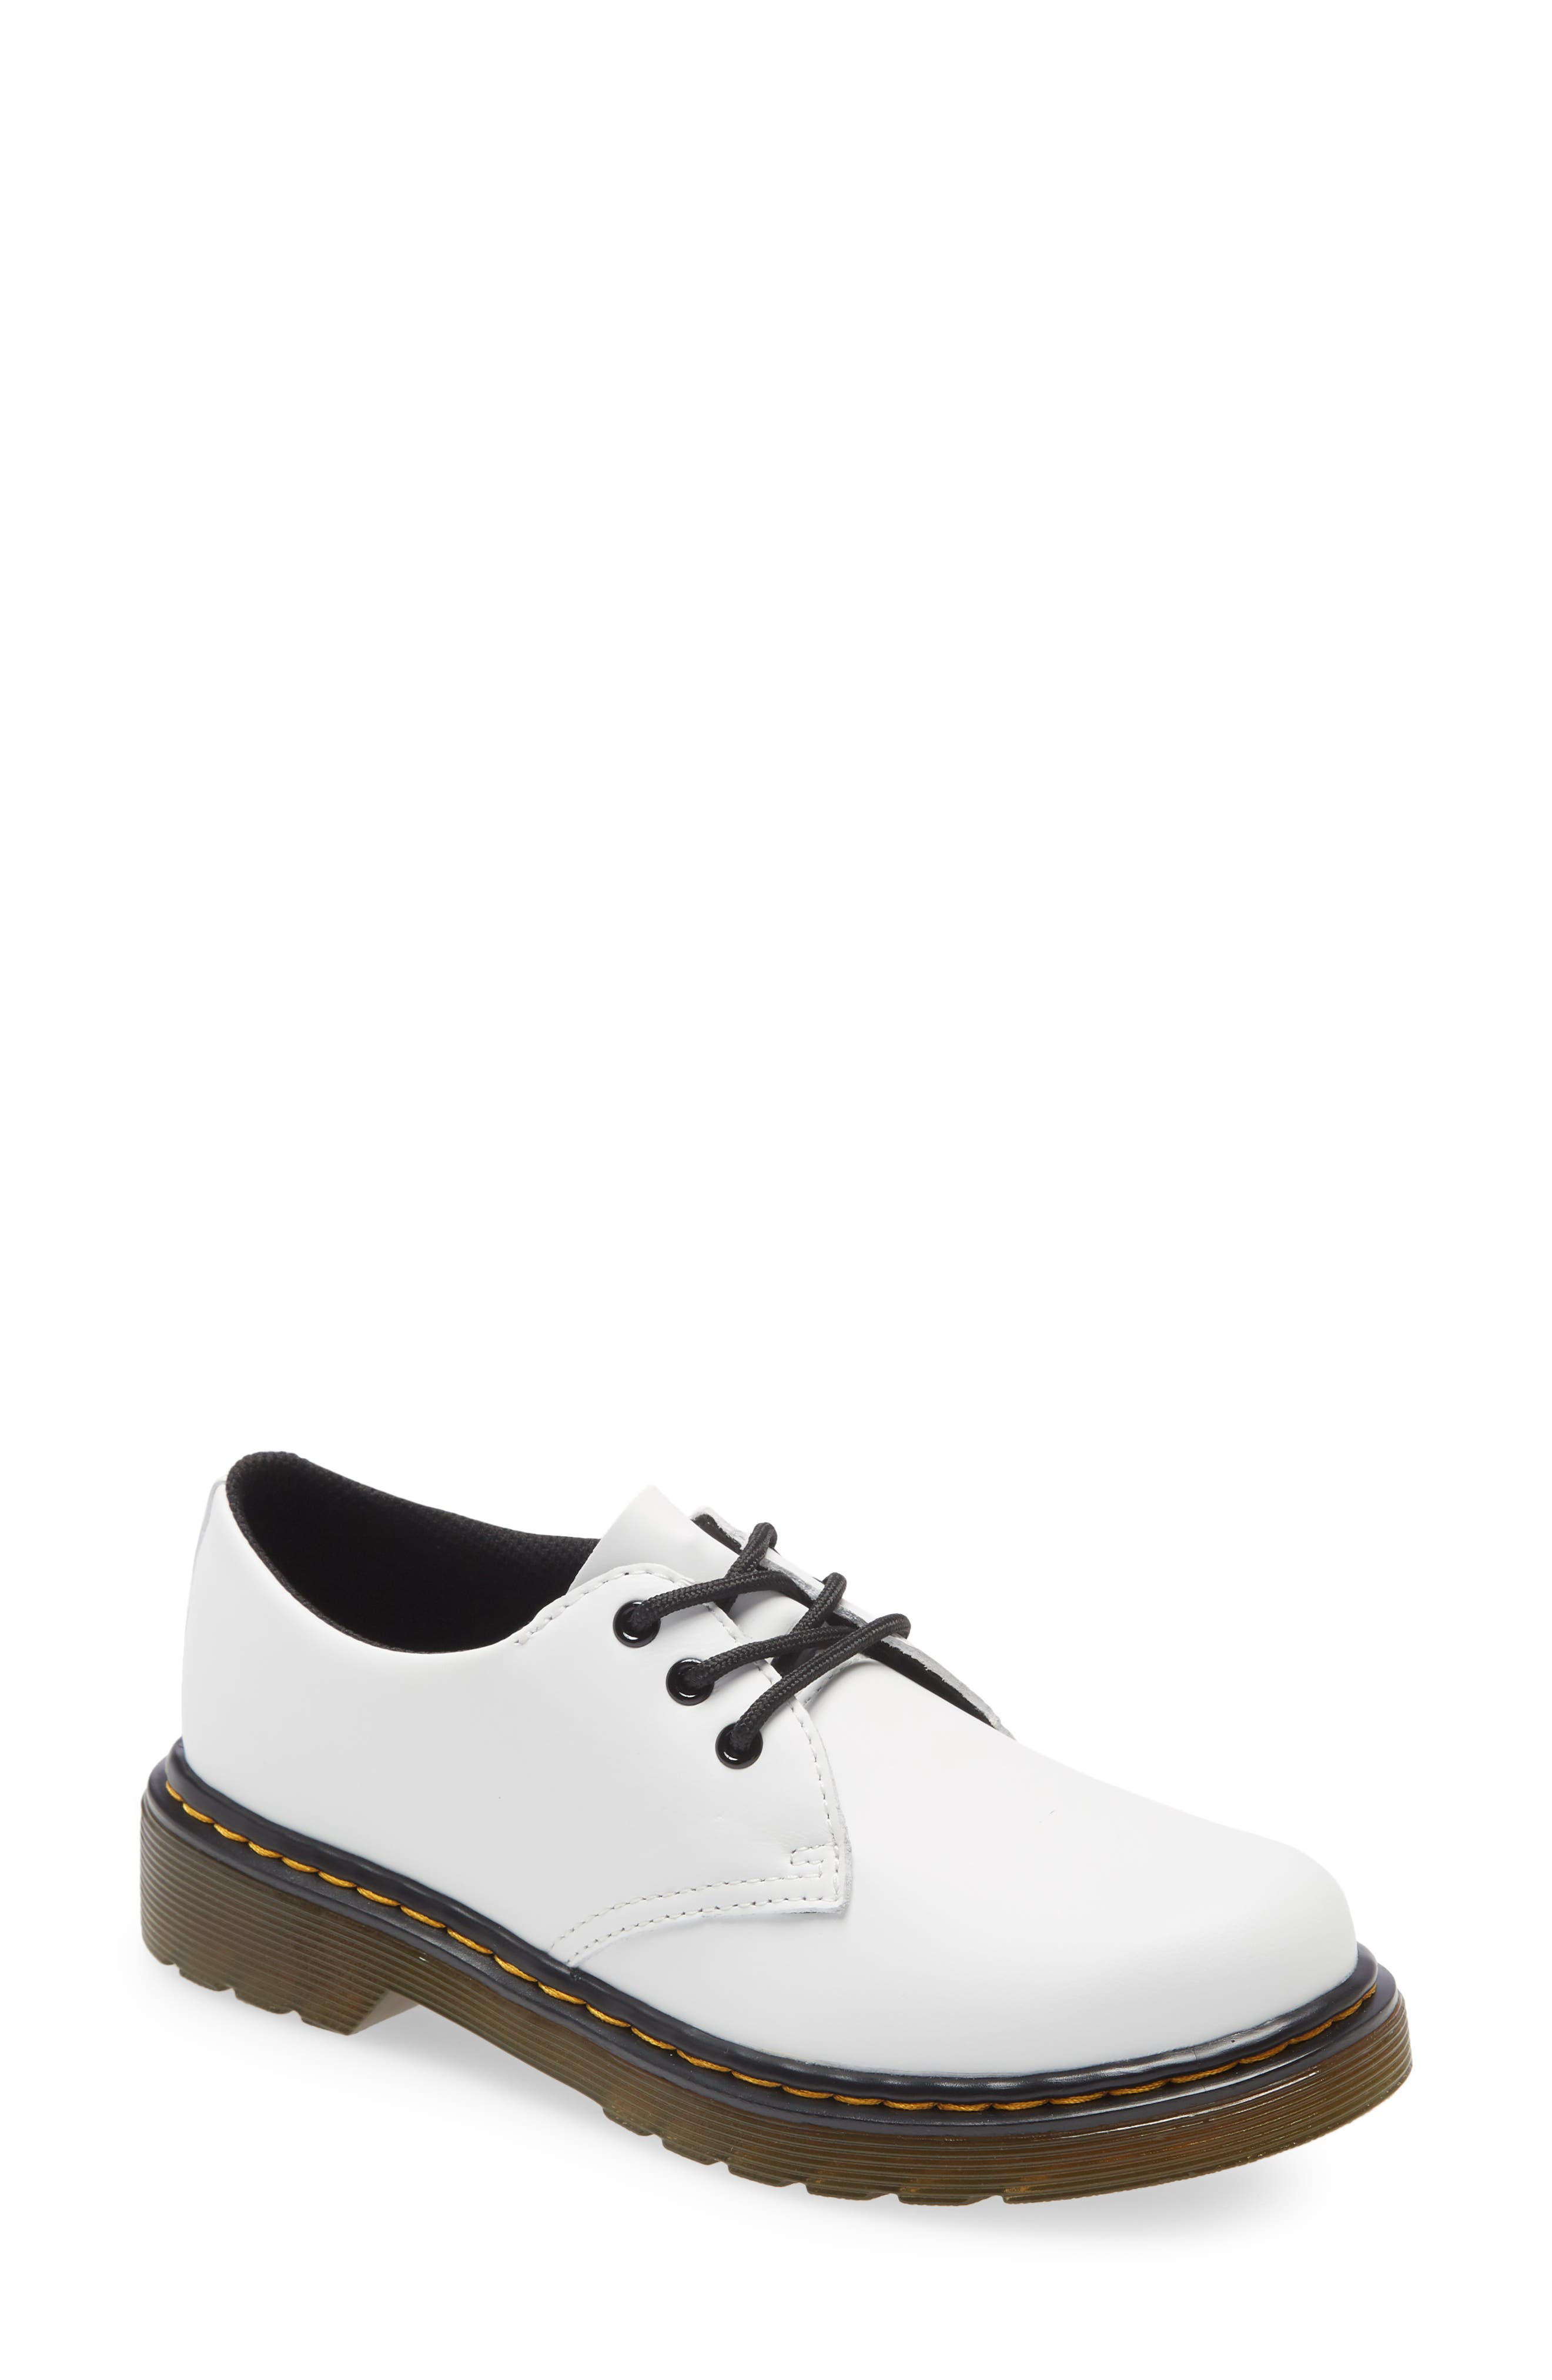 Dr. Martens 1461 Derby in White at Nordstrom, Size 13 M